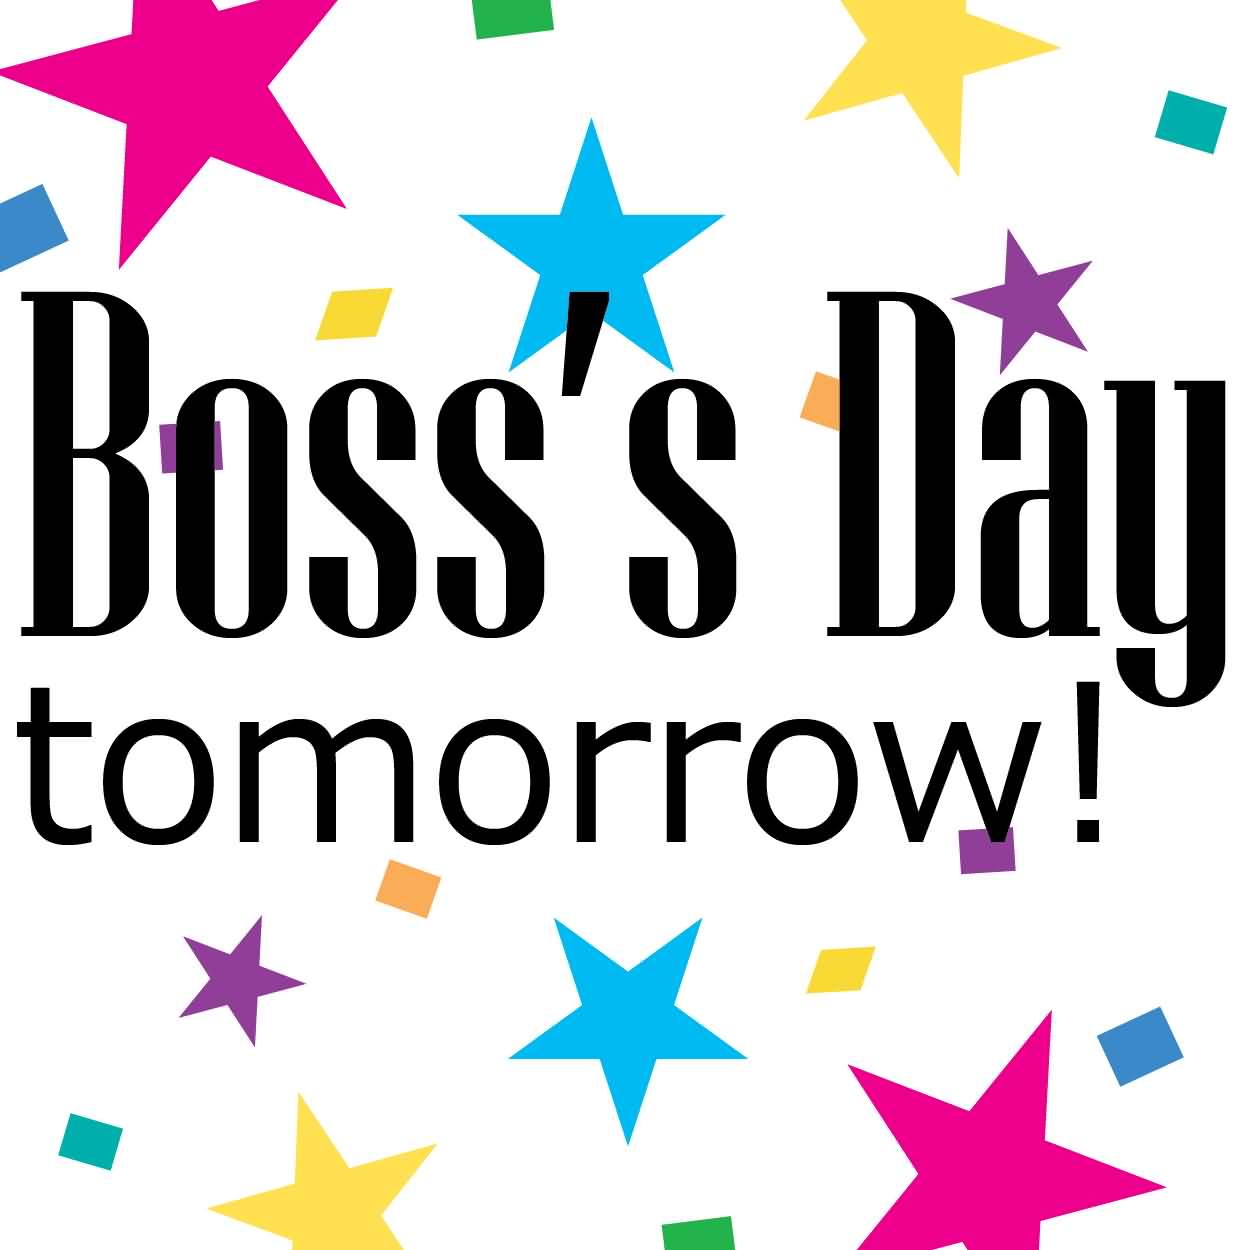 You Give Us The Strength And Support To Carry On Happy Boss Day